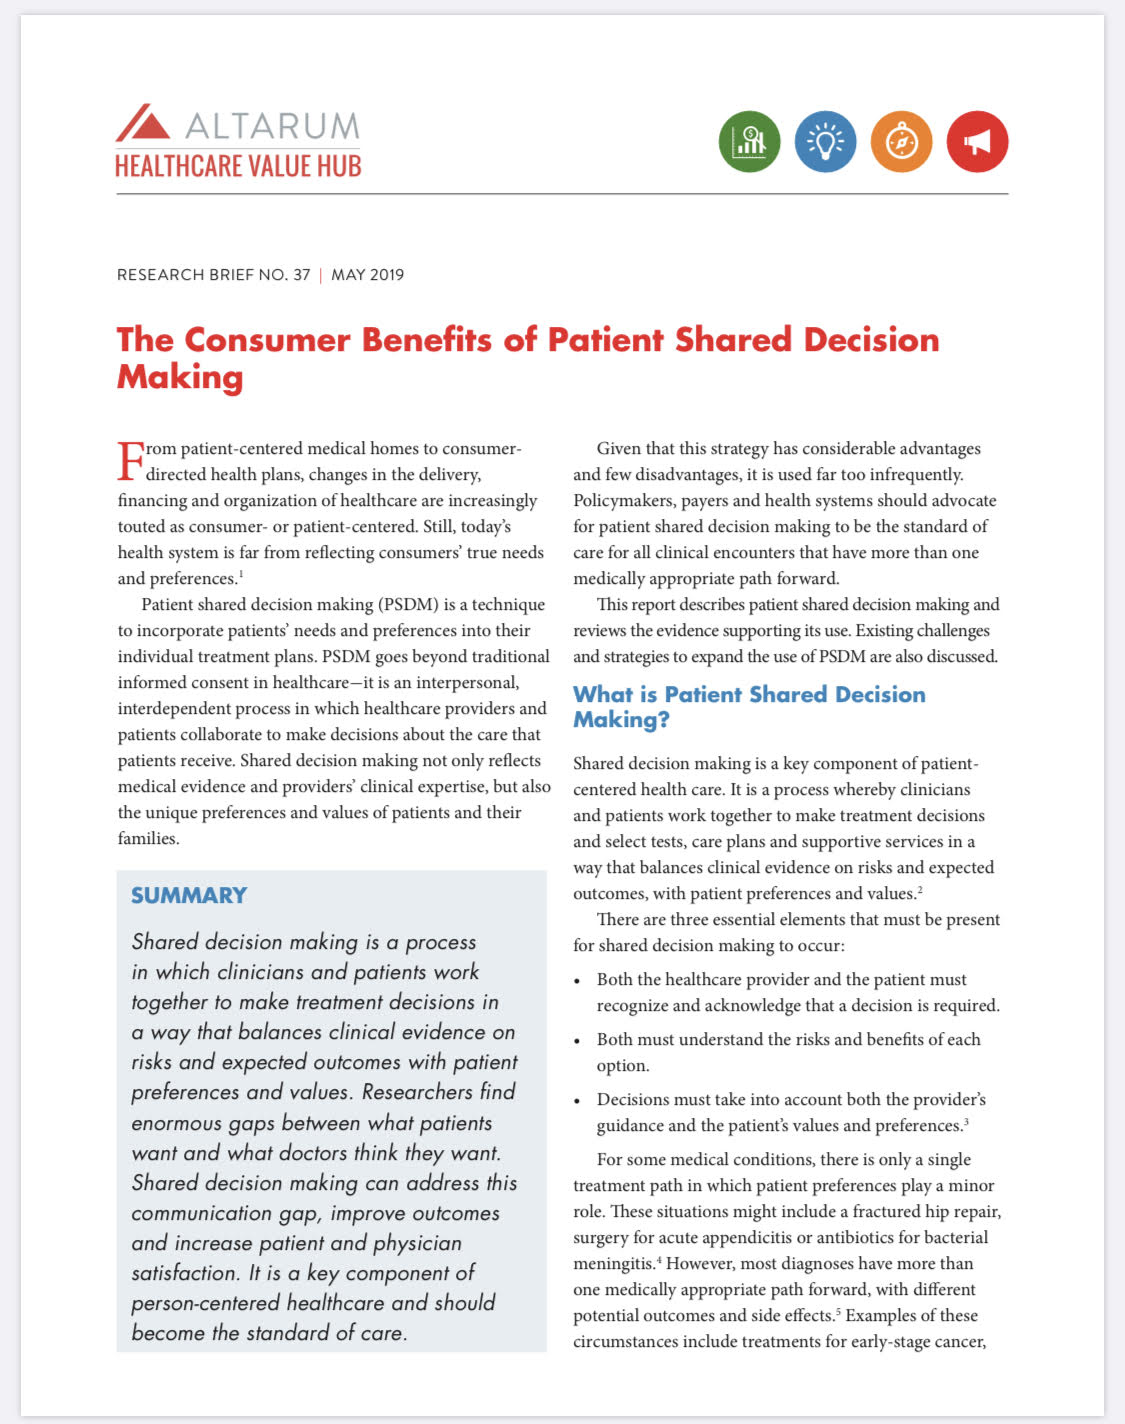 The Consumer Benefits of Patient Shared Decision Making